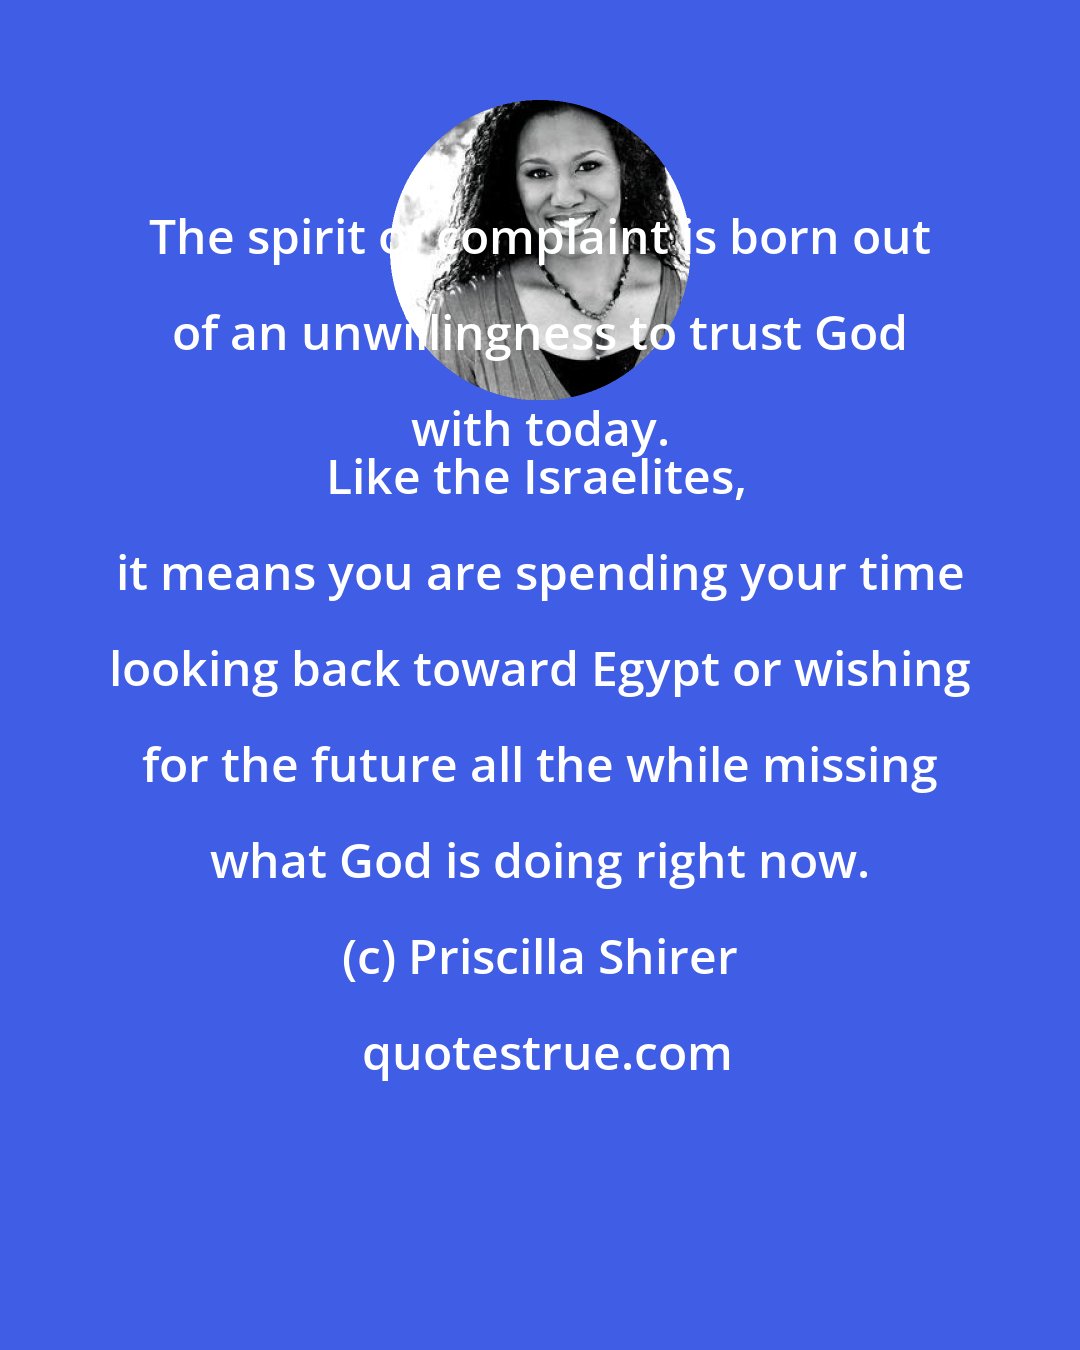 Priscilla Shirer: The spirit of complaint is born out of an unwillingness to trust God with today. 
Like the Israelites, it means you are spending your time looking back toward Egypt or wishing for the future all the while missing what God is doing right now.